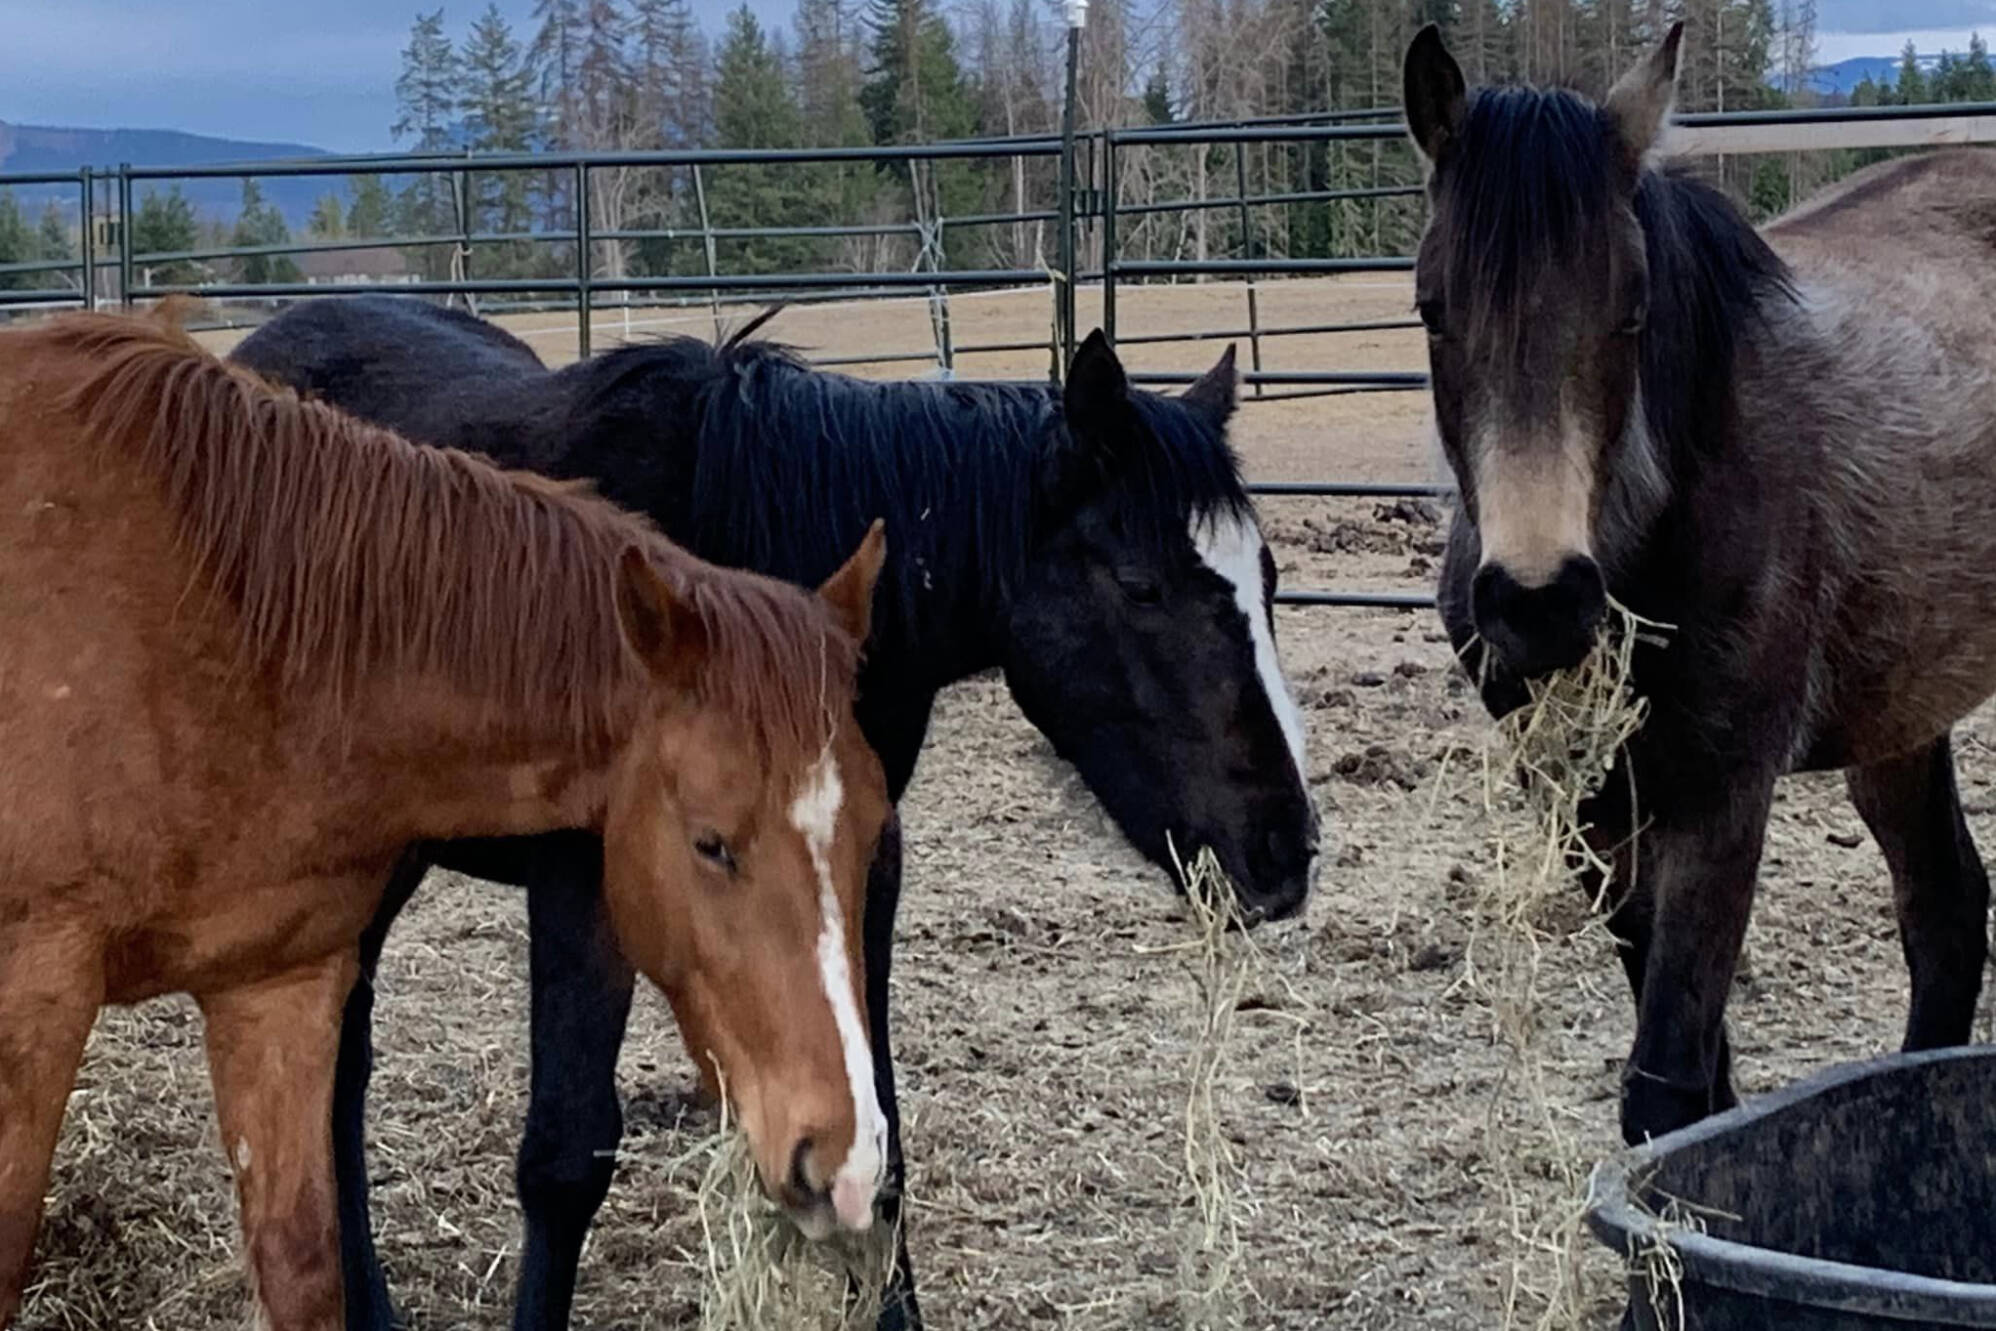 Three of the horses in care at Salmon Arm’s BC Horse Angels. Luke, in the middle, died of nitrate poisoning the week of Dec. 18 2022, from tainted hay. Two other horses died during the week as well. (BC Horse Angels/ Facebook)